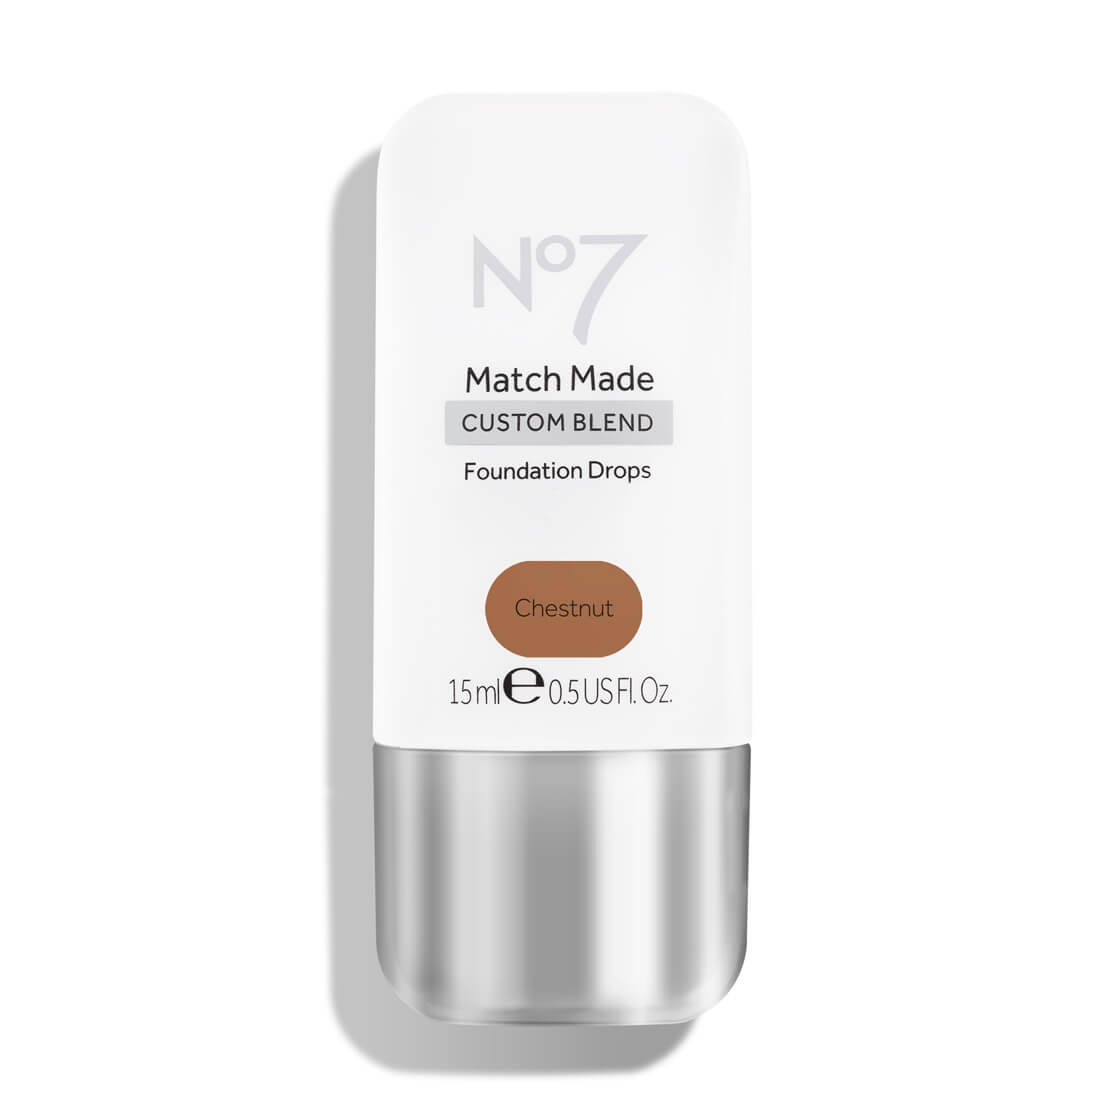 Match Made Foundation Drops (Various Shades) - 24 Chestnut